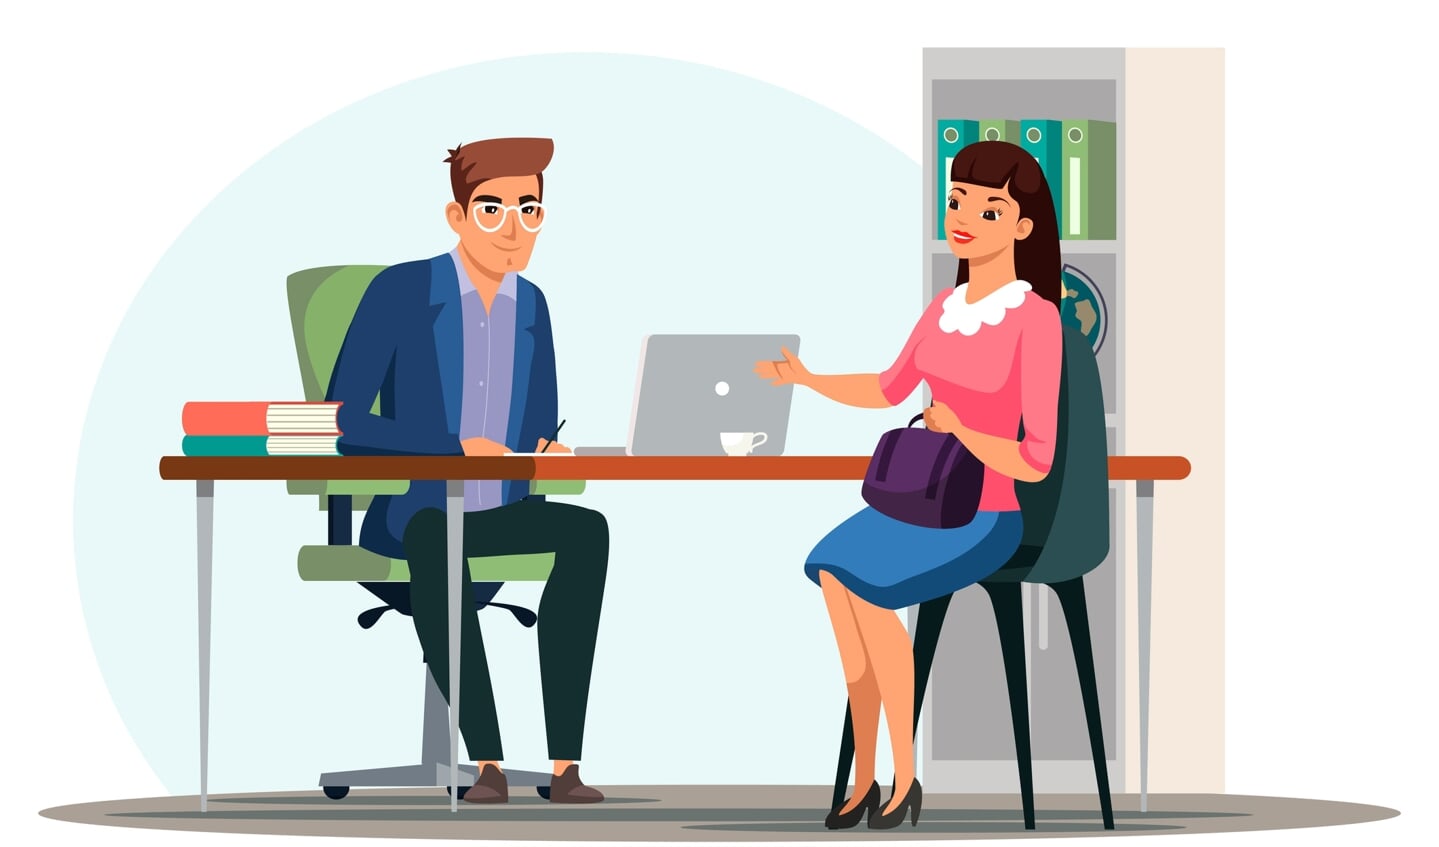 People work office scene. Manager recruiter interviews candidate. Man and woman sitting at table and talking. Recruitment, job interview, resumes, professional meeting. Vector character illustration